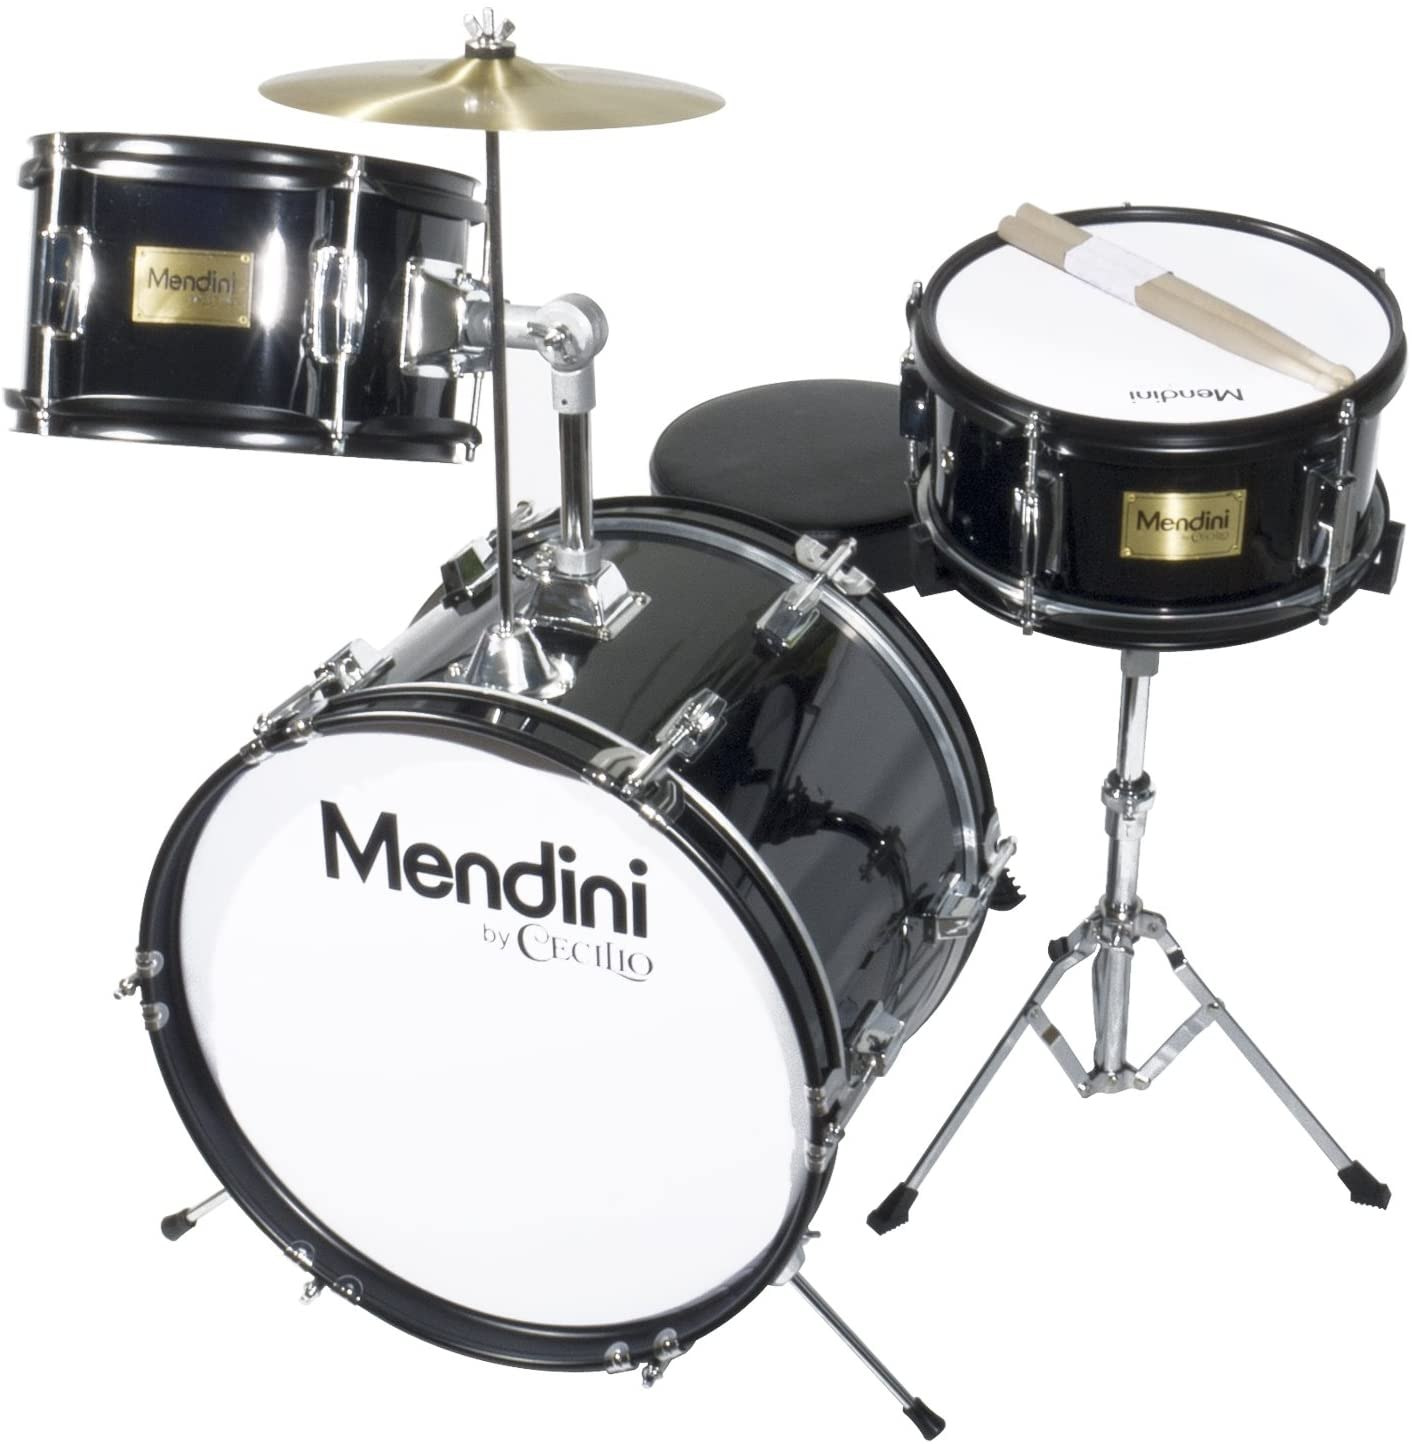 Mendini by Cecilio 16 inch 3-Piece Kids/Junior Drum Set with Adjustable Throne, Cymbal, Pedal & Drumsticks, Metallic Green, MJDS-3-GN 8